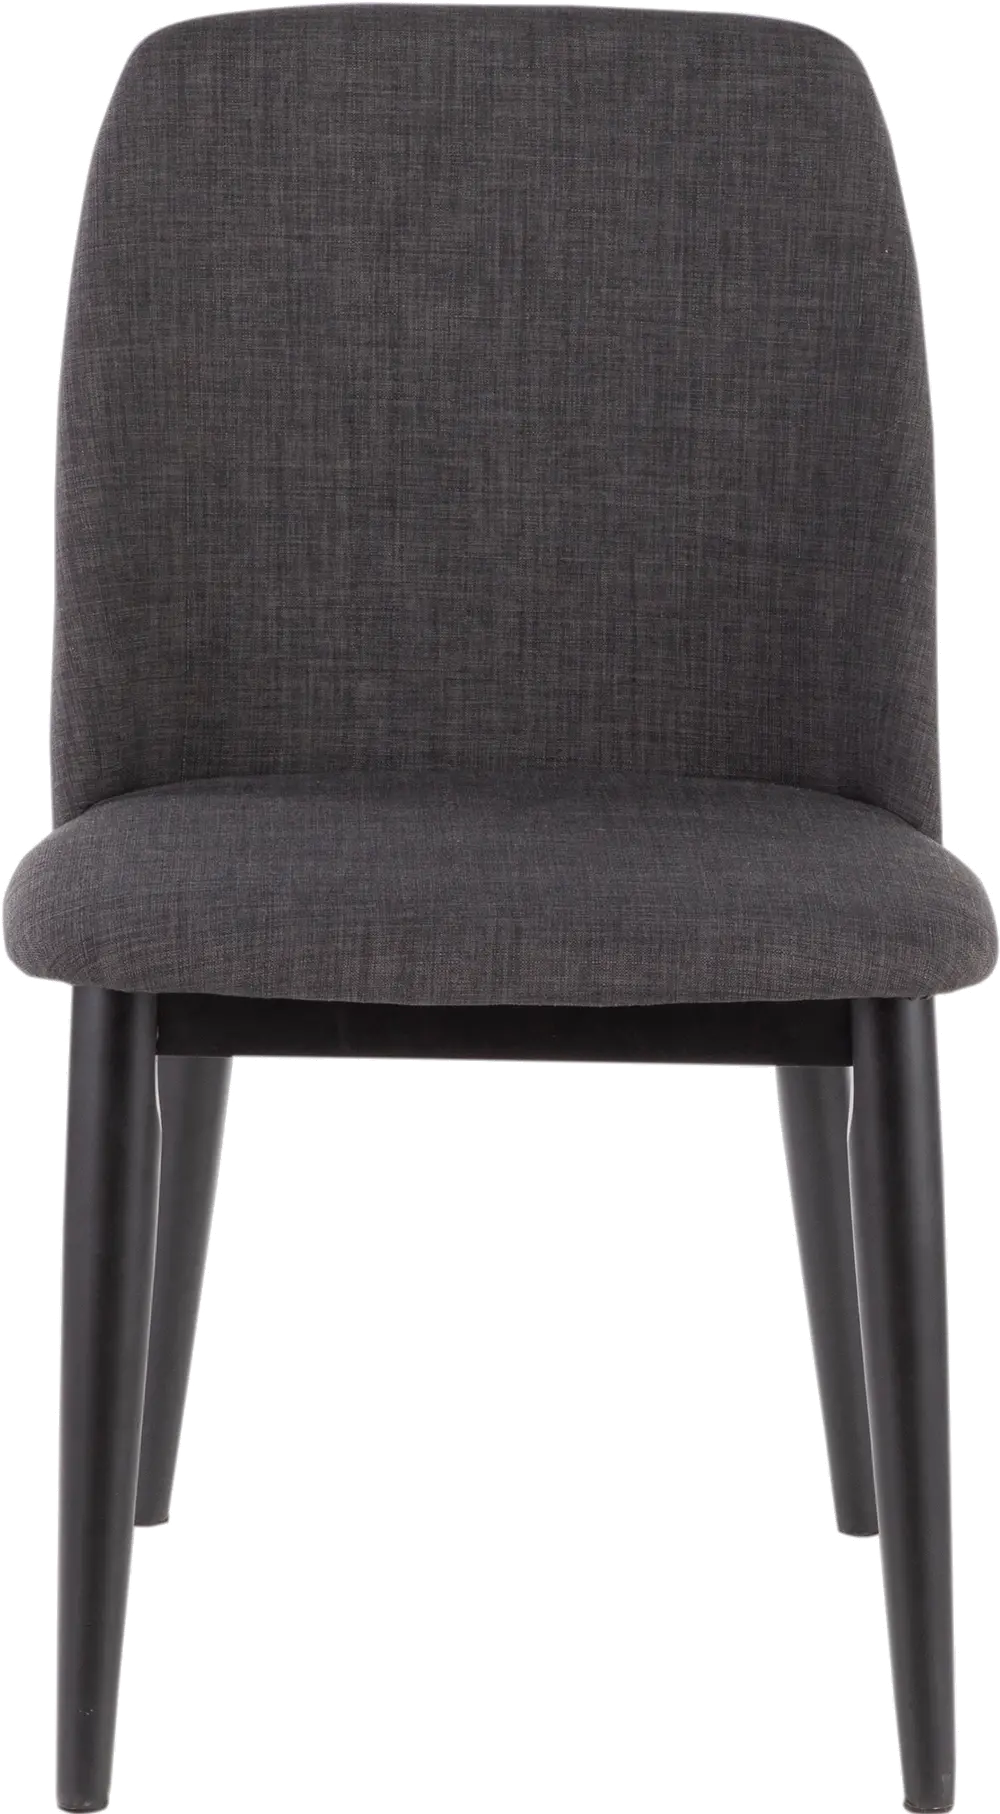 CHR-TNT-CHAR-B2 Charcoal Upholstered Dining Room Chairs (Set of 2) - Tintori-1